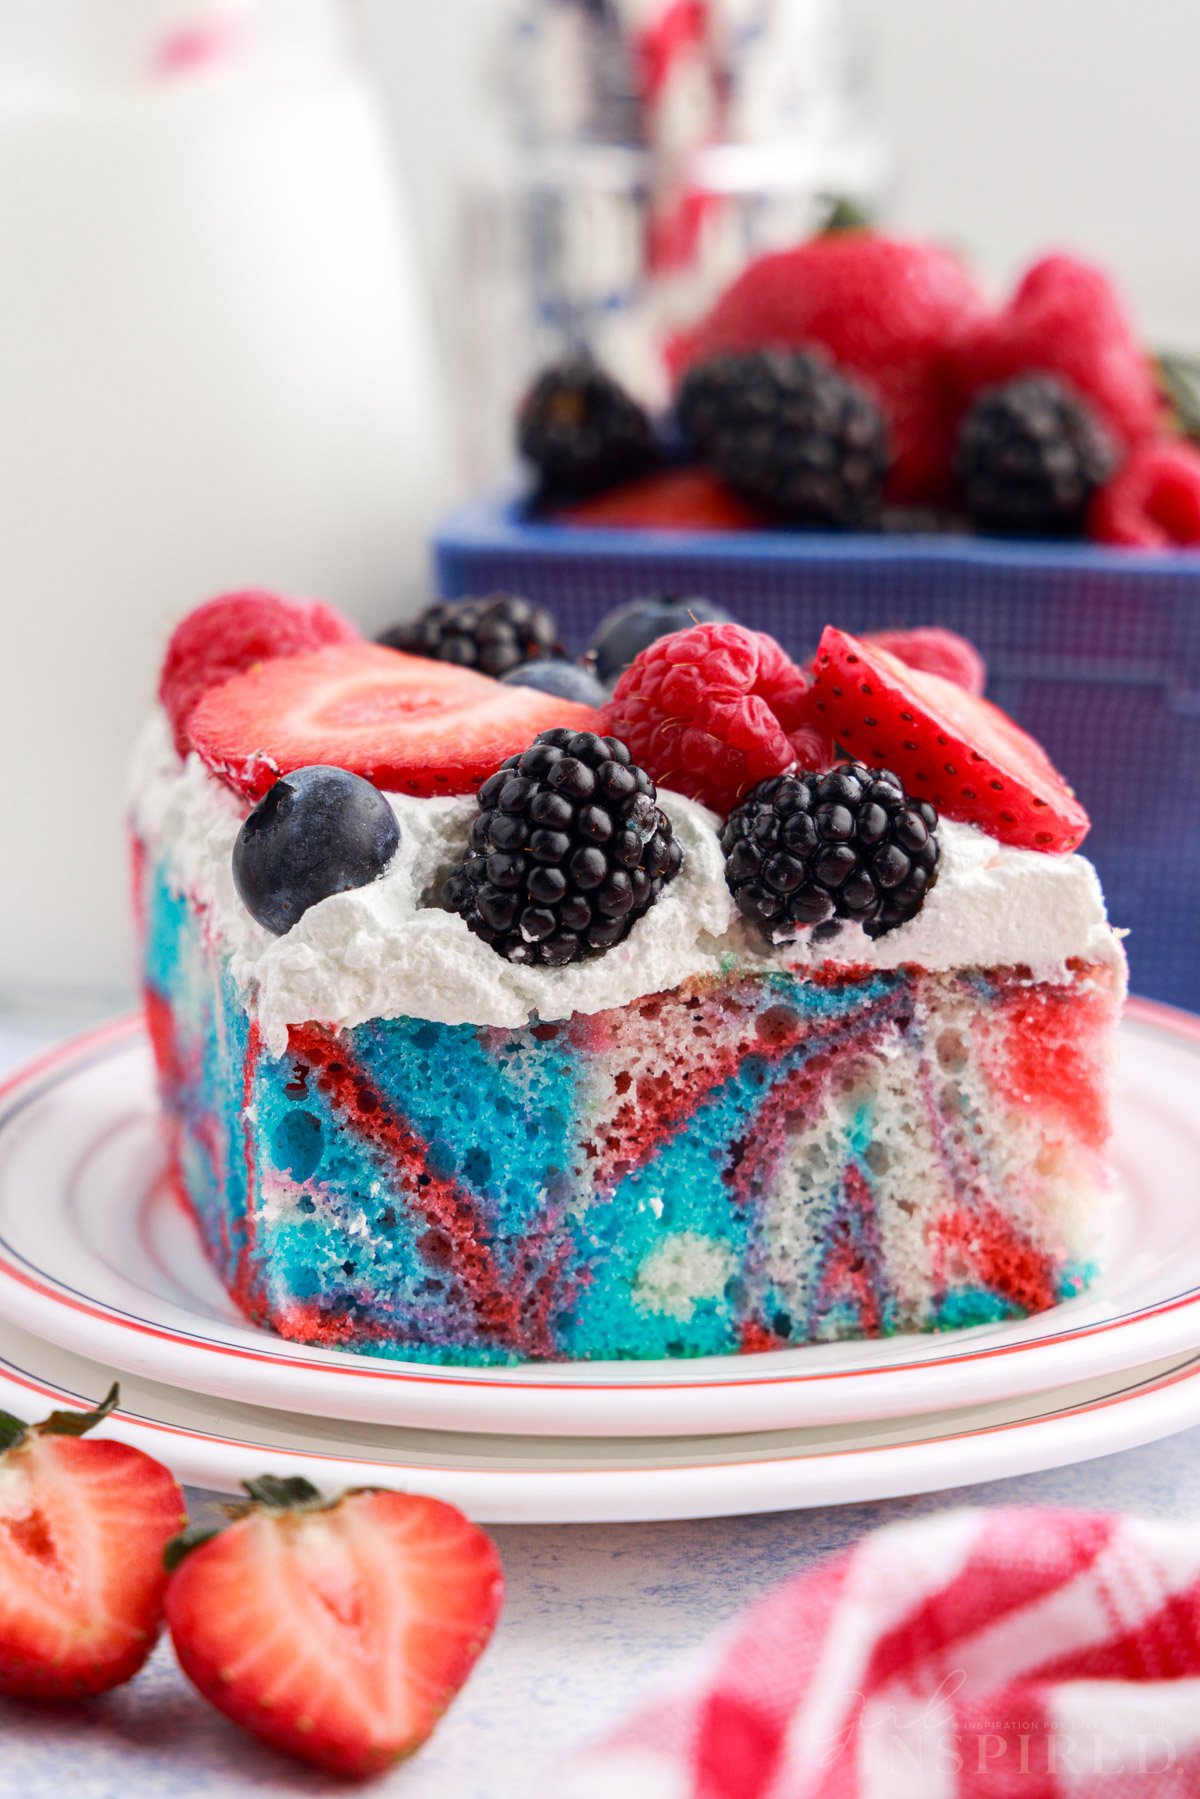 A small dish with a slice of Red White and Blue Marble Cake on it.